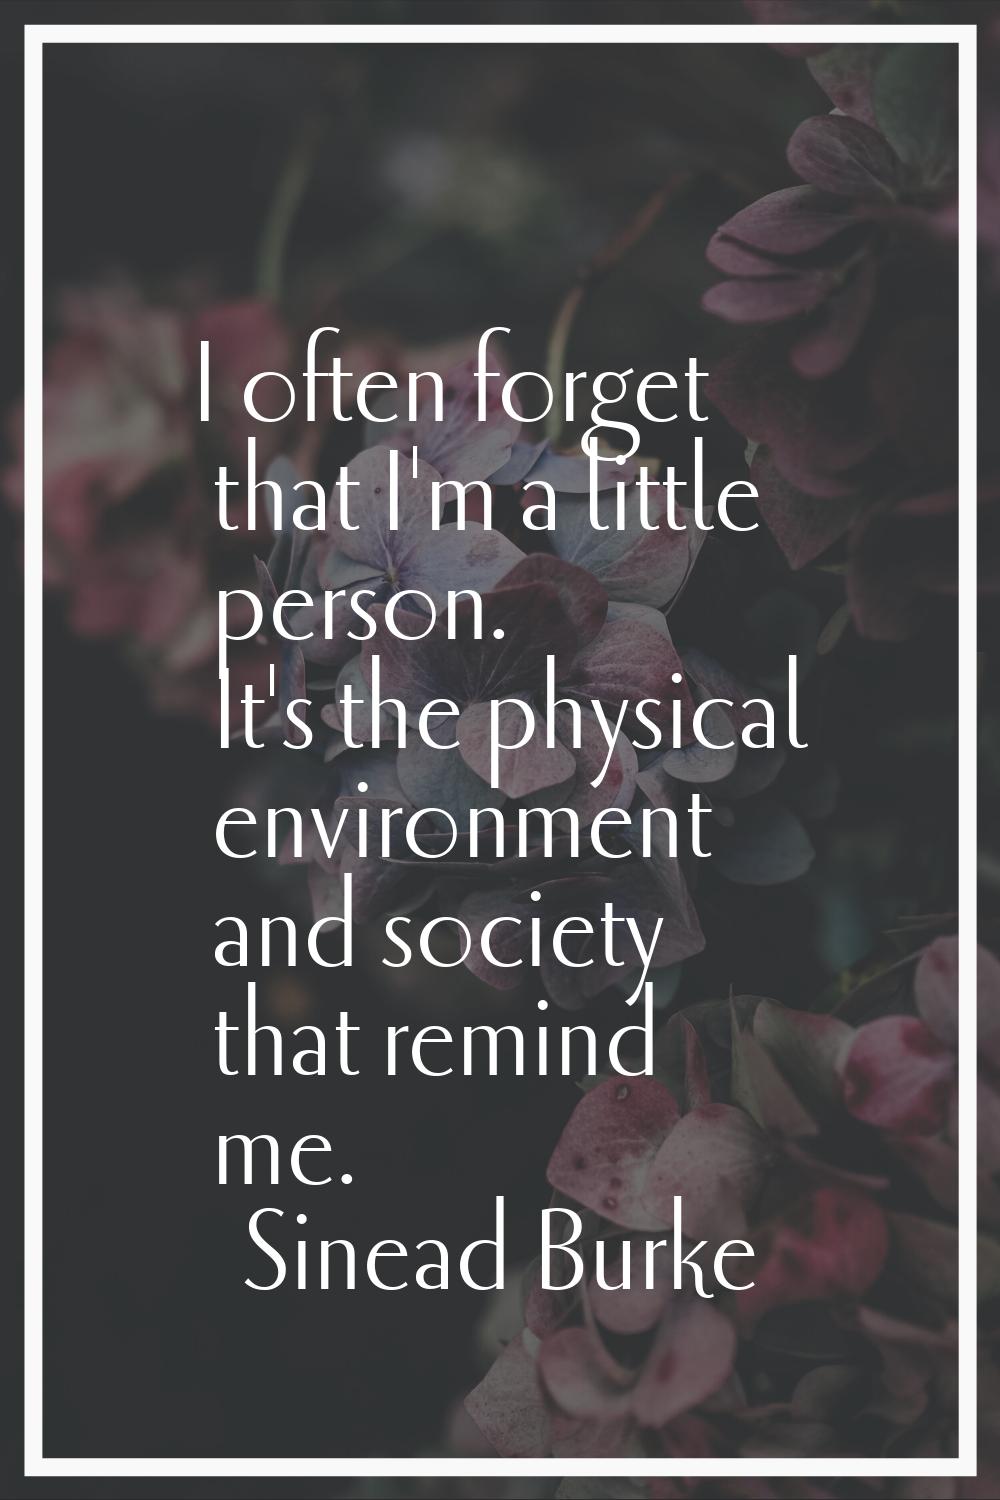 I often forget that I'm a little person. It's the physical environment and society that remind me.